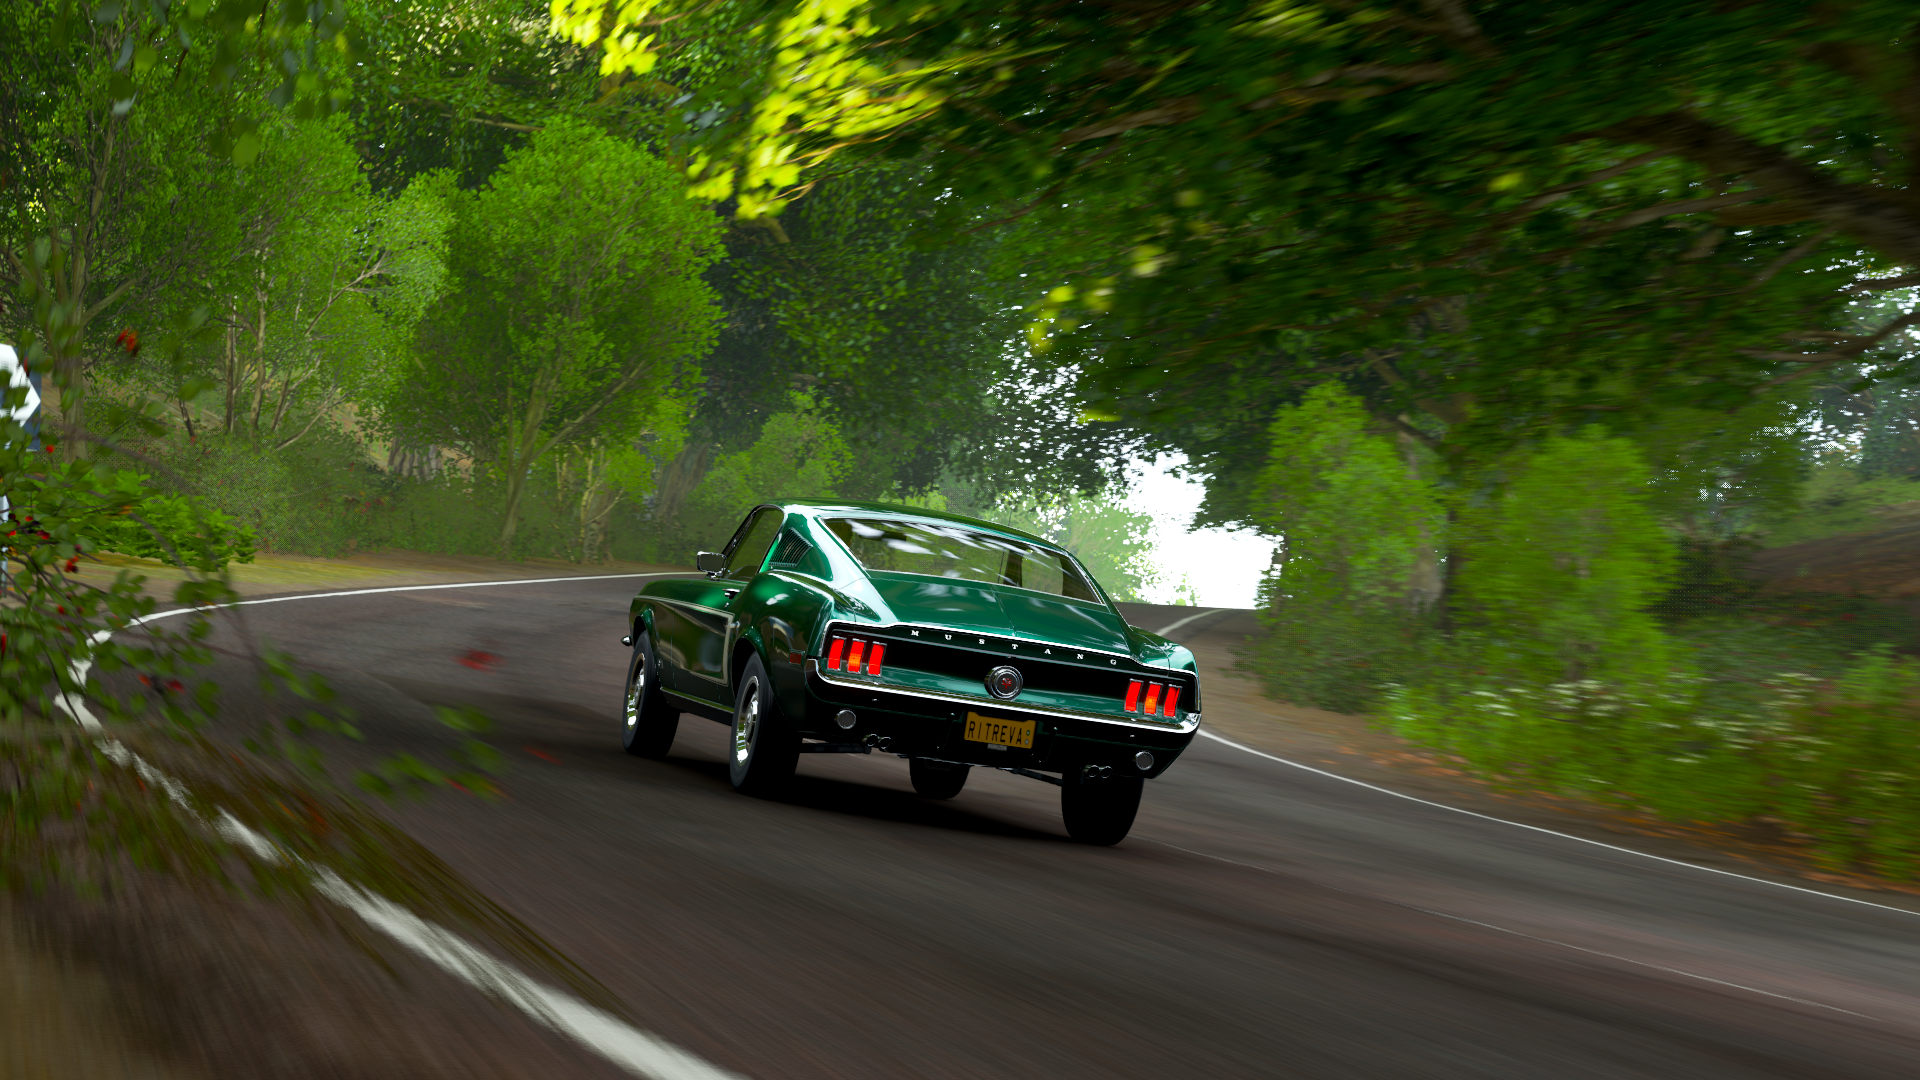 General 1920x1080 Forza Horizon 4 1965 Ford Mustang video games green cars car Ford Mustang Ford vehicle